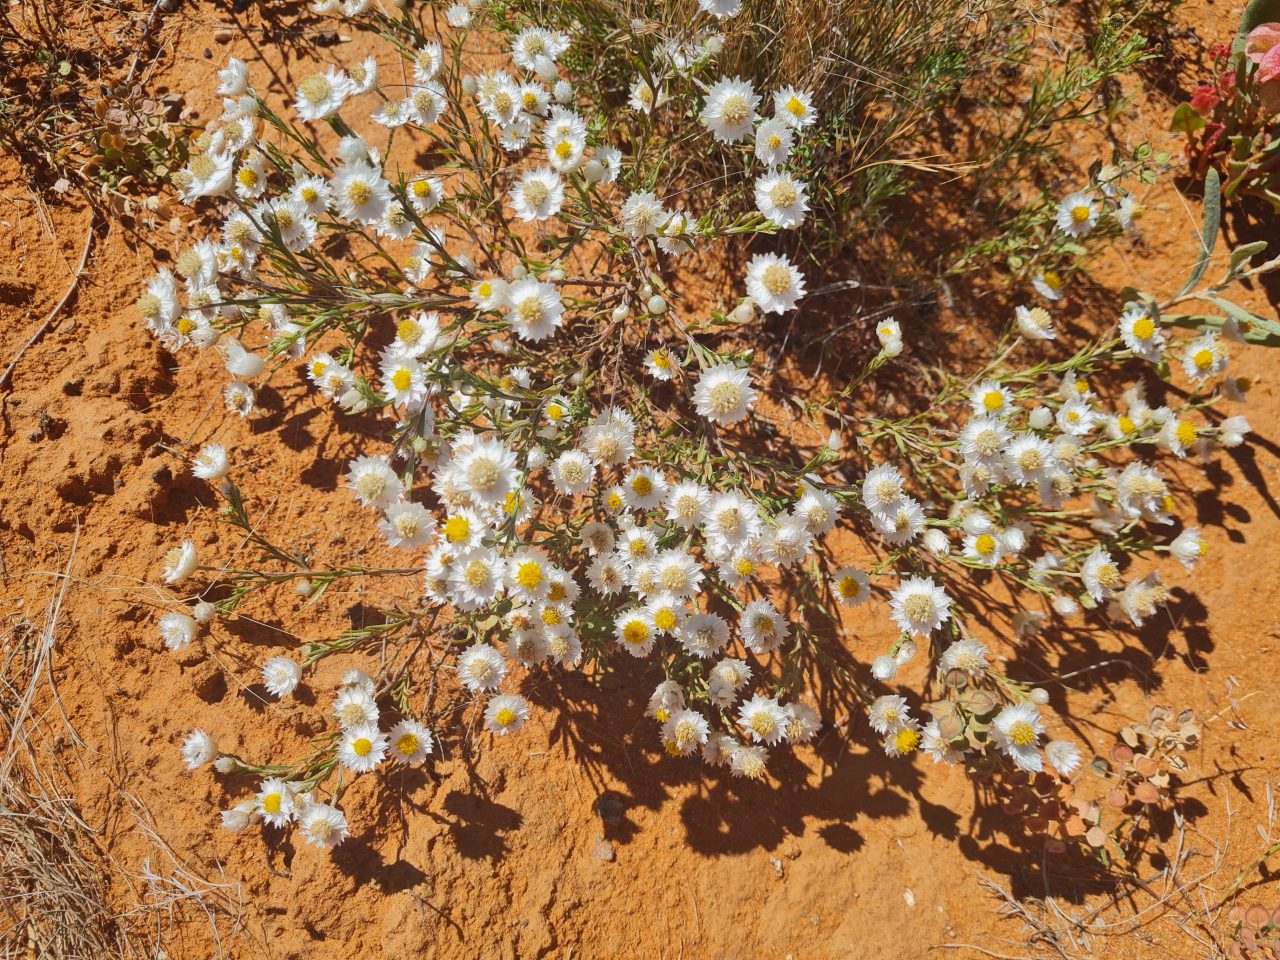 Close up photo of a cluster desert flowers that have petite white petals with yellow centres at the end of light green stems and leaves. The ground is bright orange soil